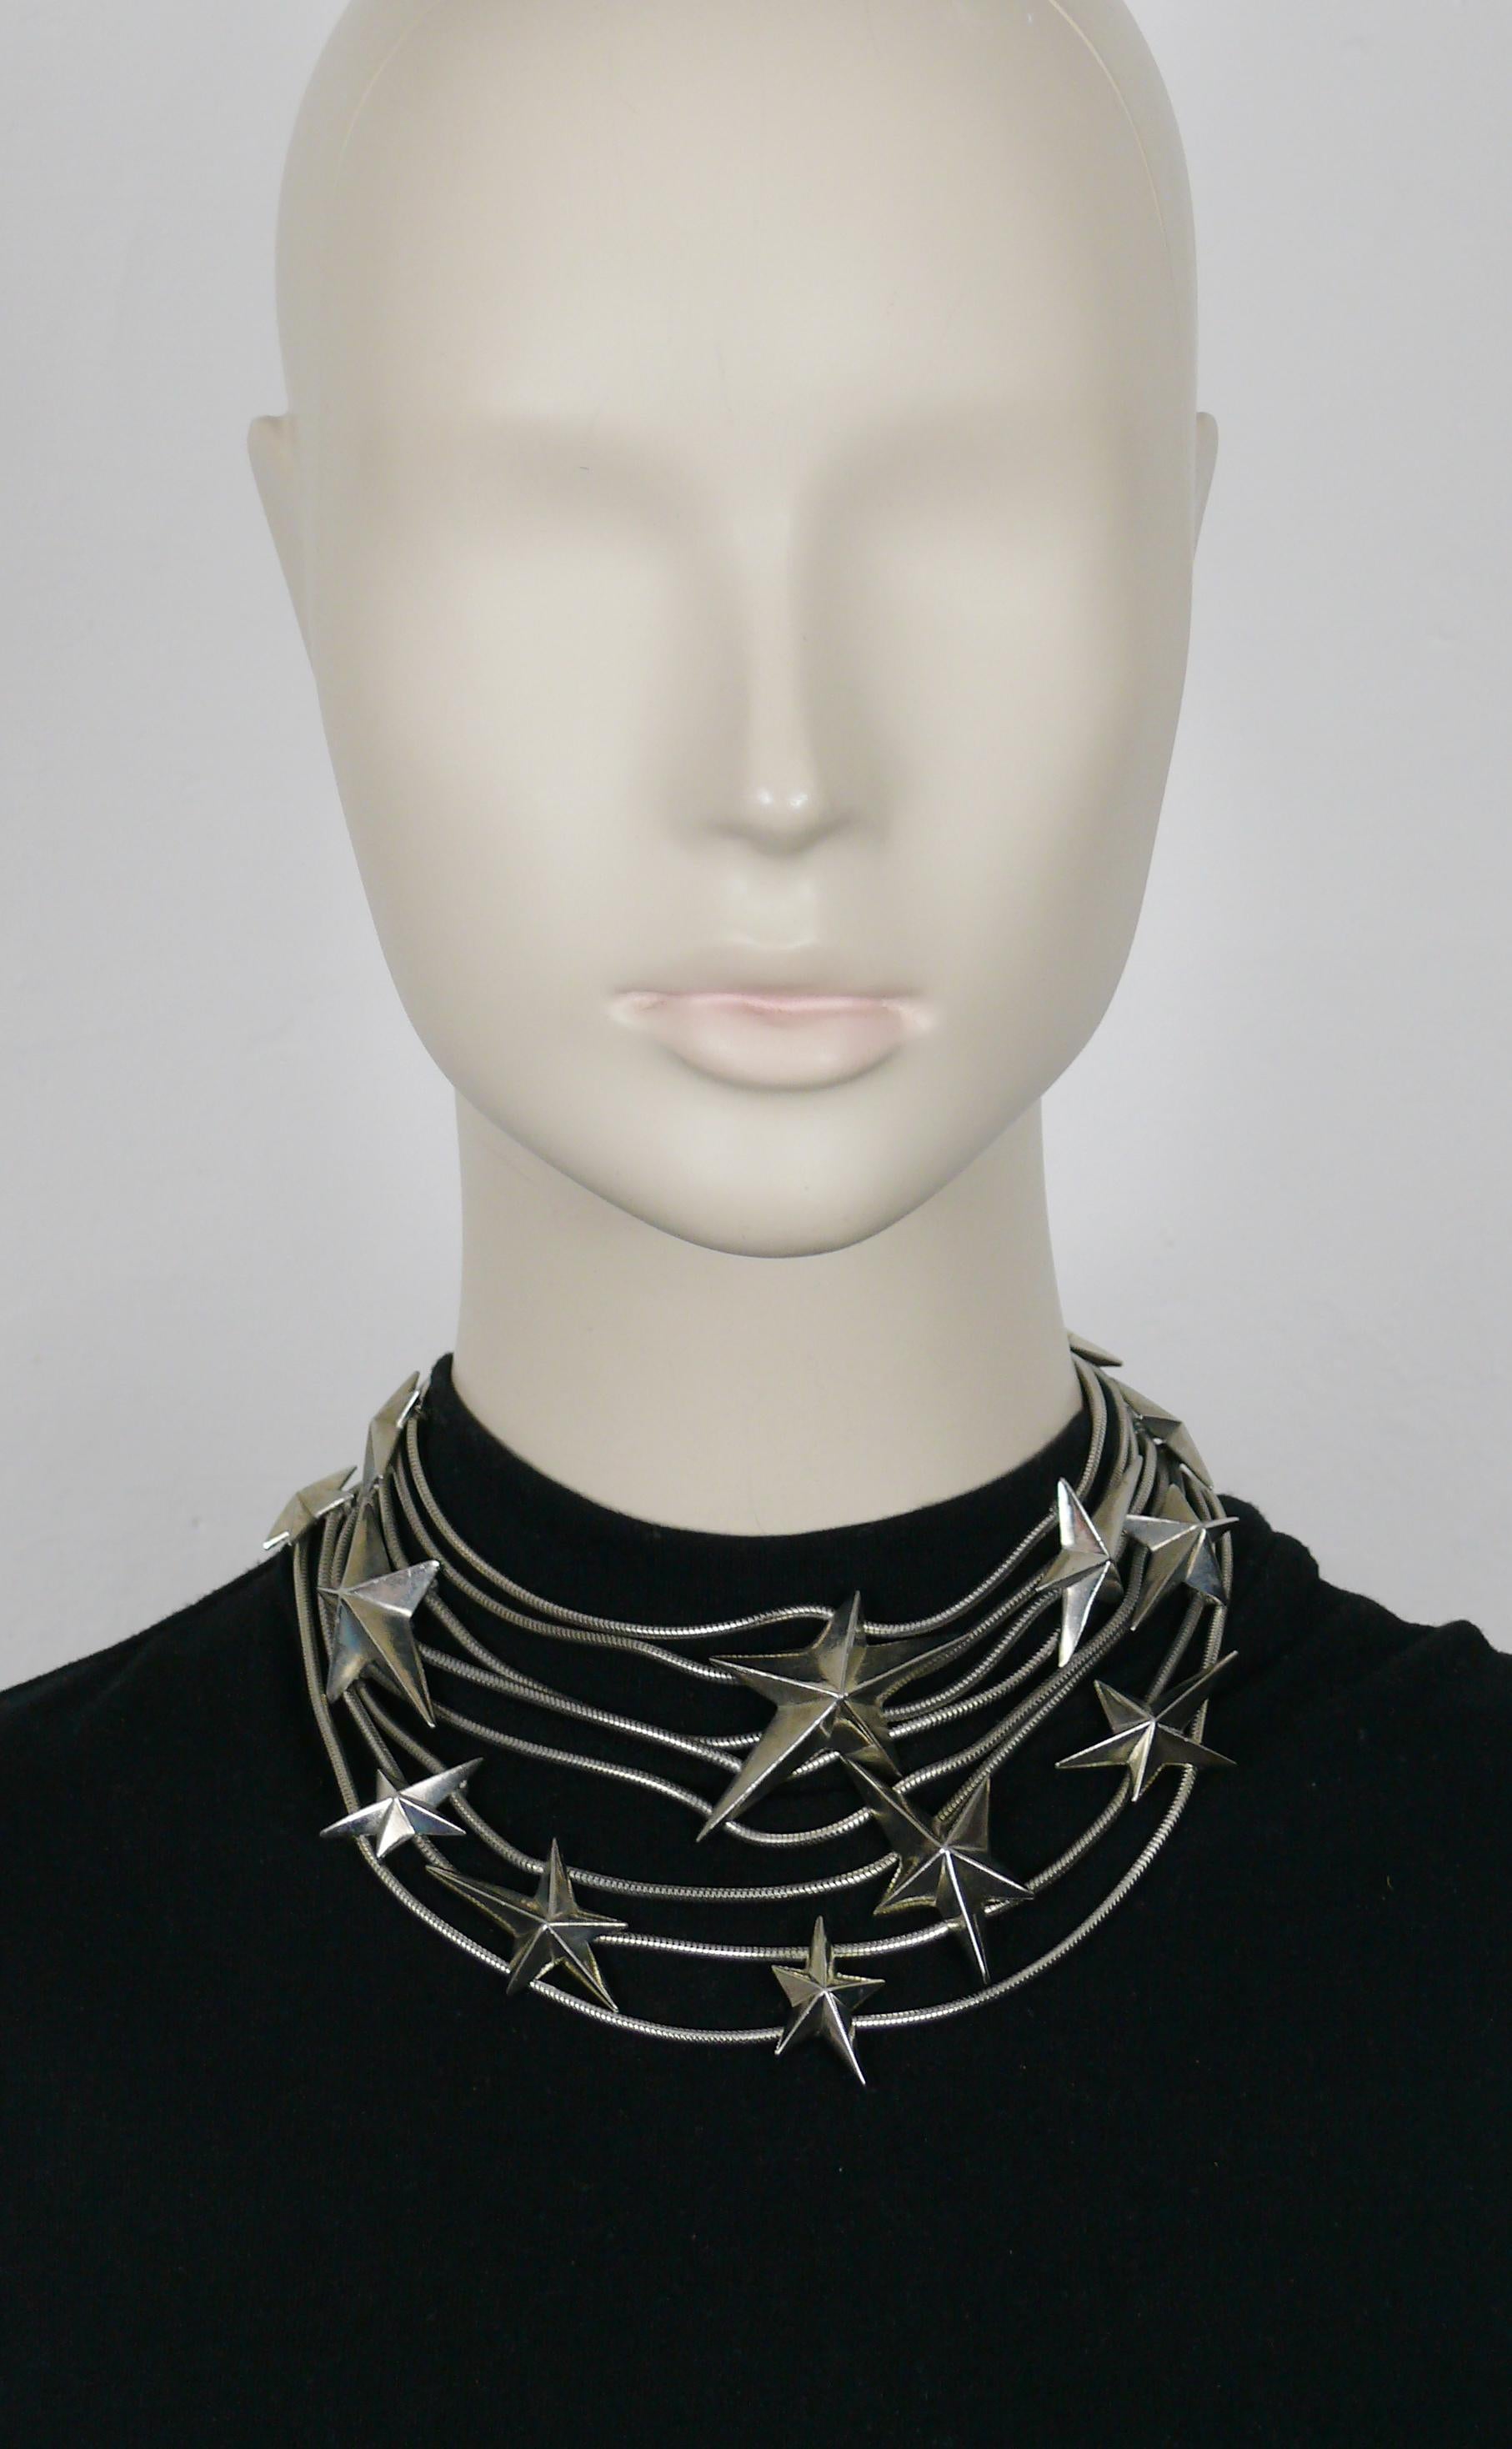 THIERRY MUGLER vintage antiqued silver tone multi strand snake chains choker necklace embellished with THIERRY MUGLER's iconic stars.

Adjustable T-bar and toggle closure.

Embossed THIERRY MUGLER.

Indicative measurements : adjustable length from